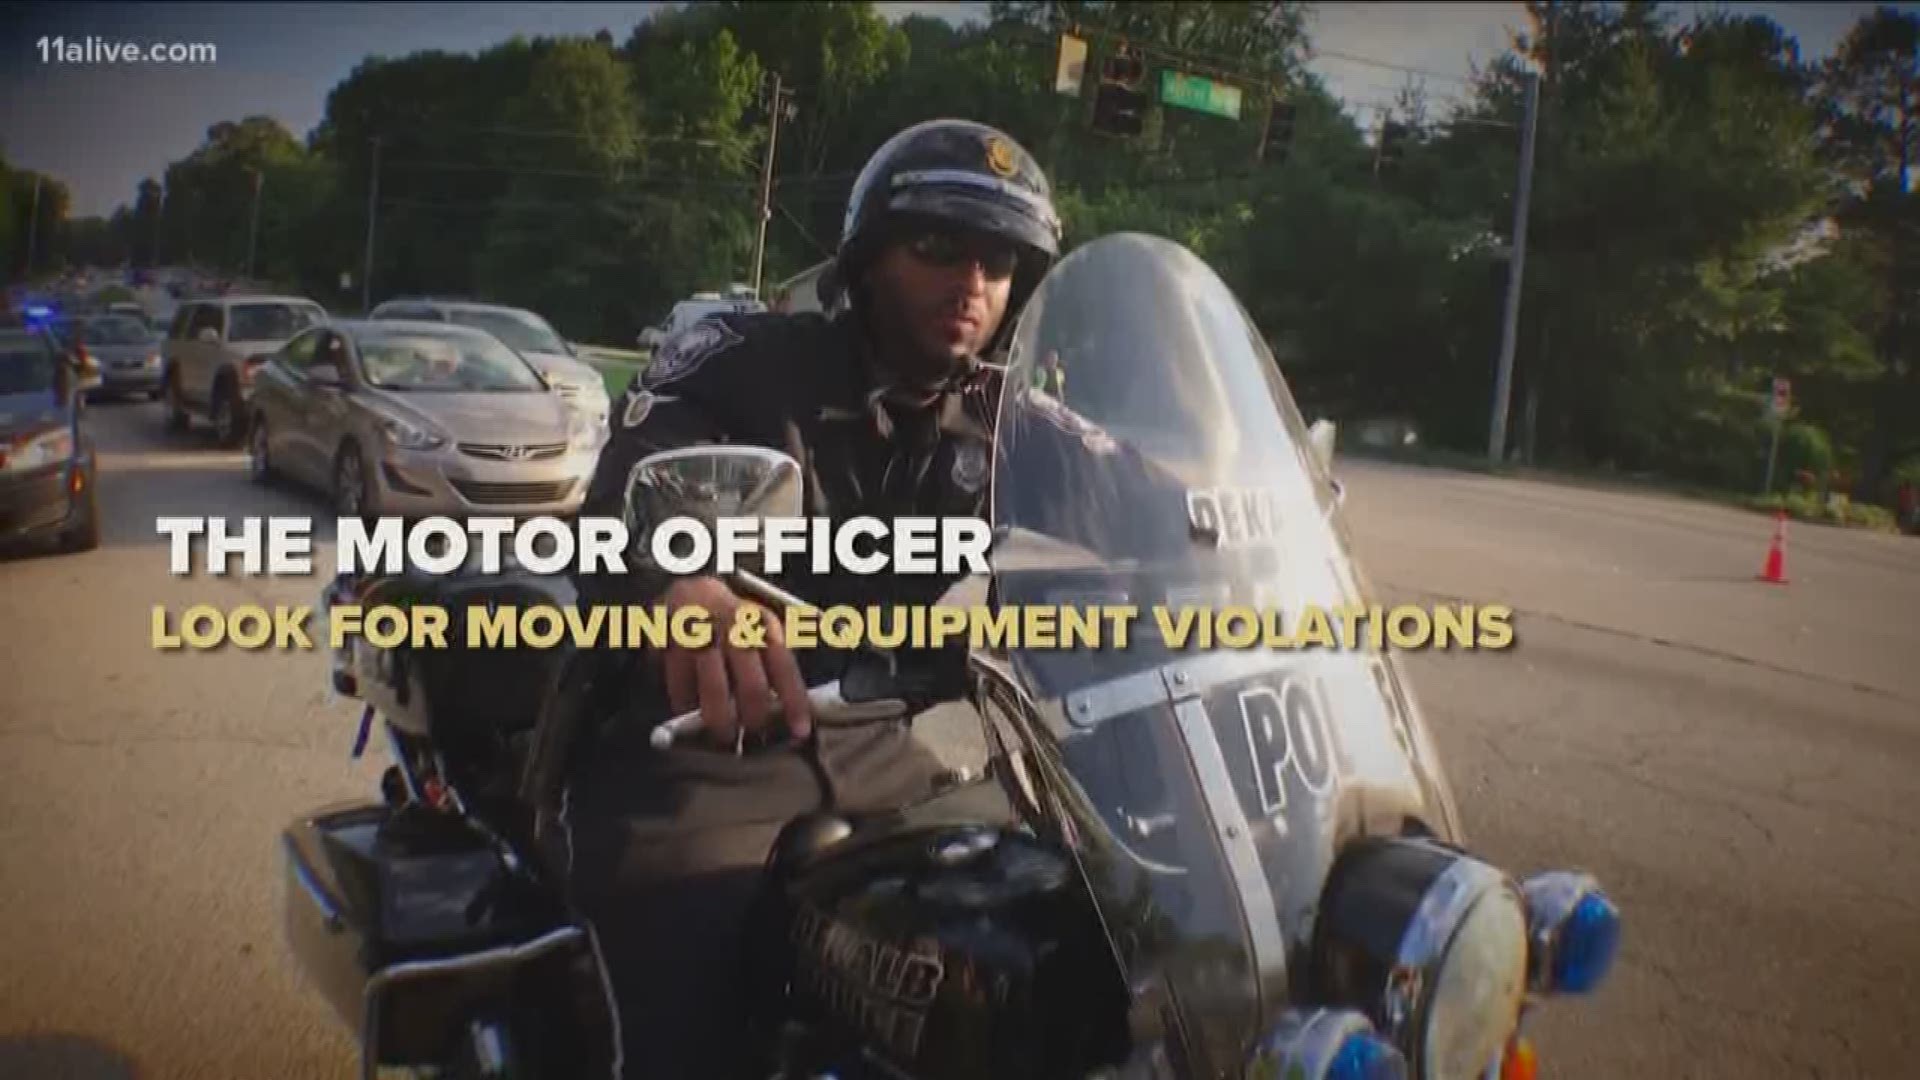 Any officer can pull you over for moving violation, however motorcycle officers usually focus on traffic enforcement and pedestrian safety.